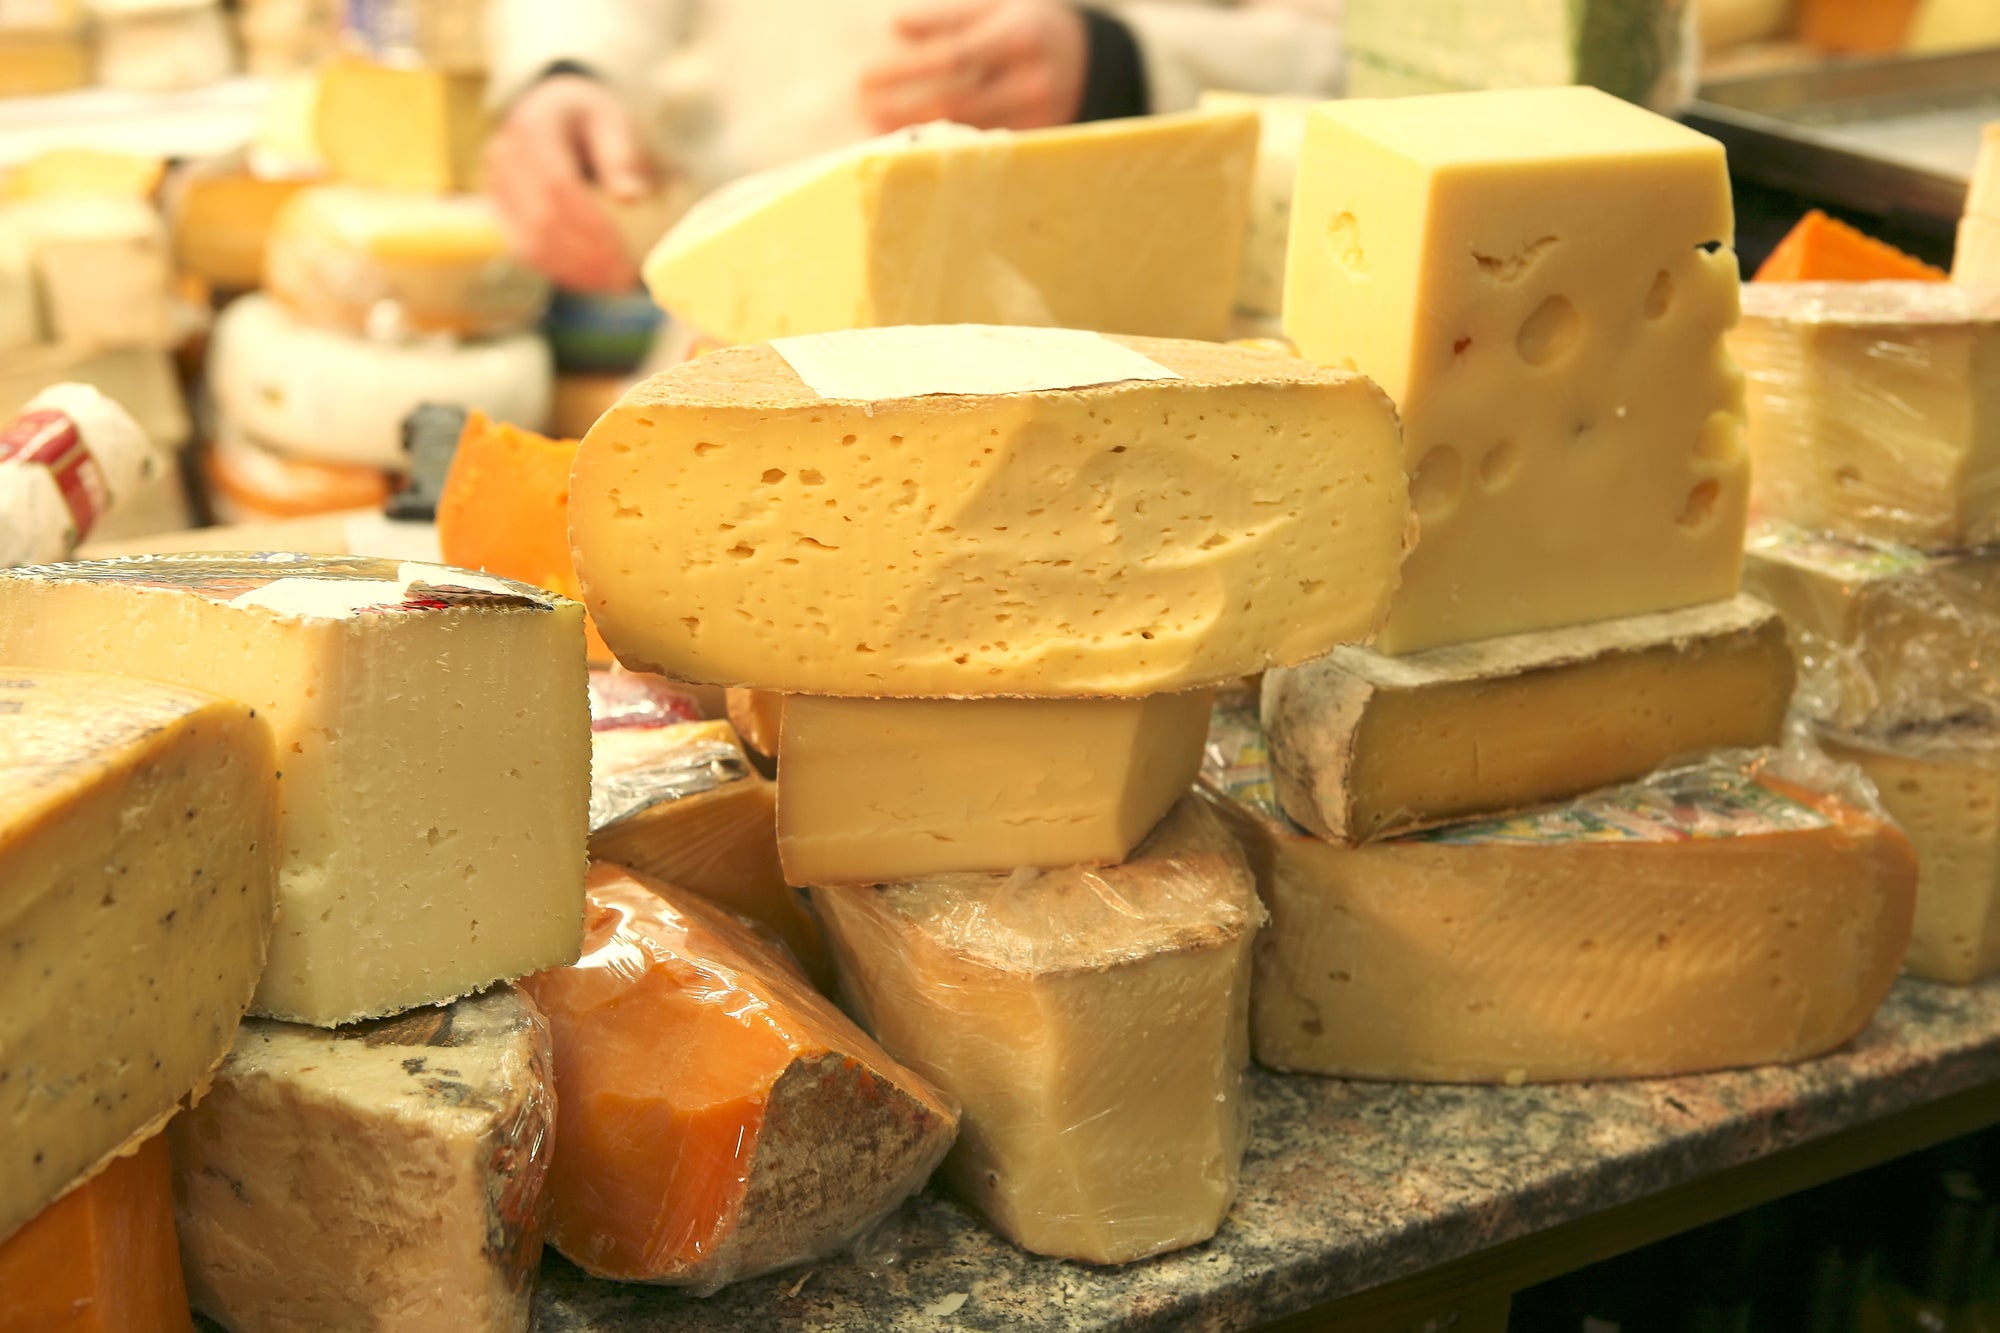 Choosing The Best Gourmet Cheese Gift for Mother’s Day